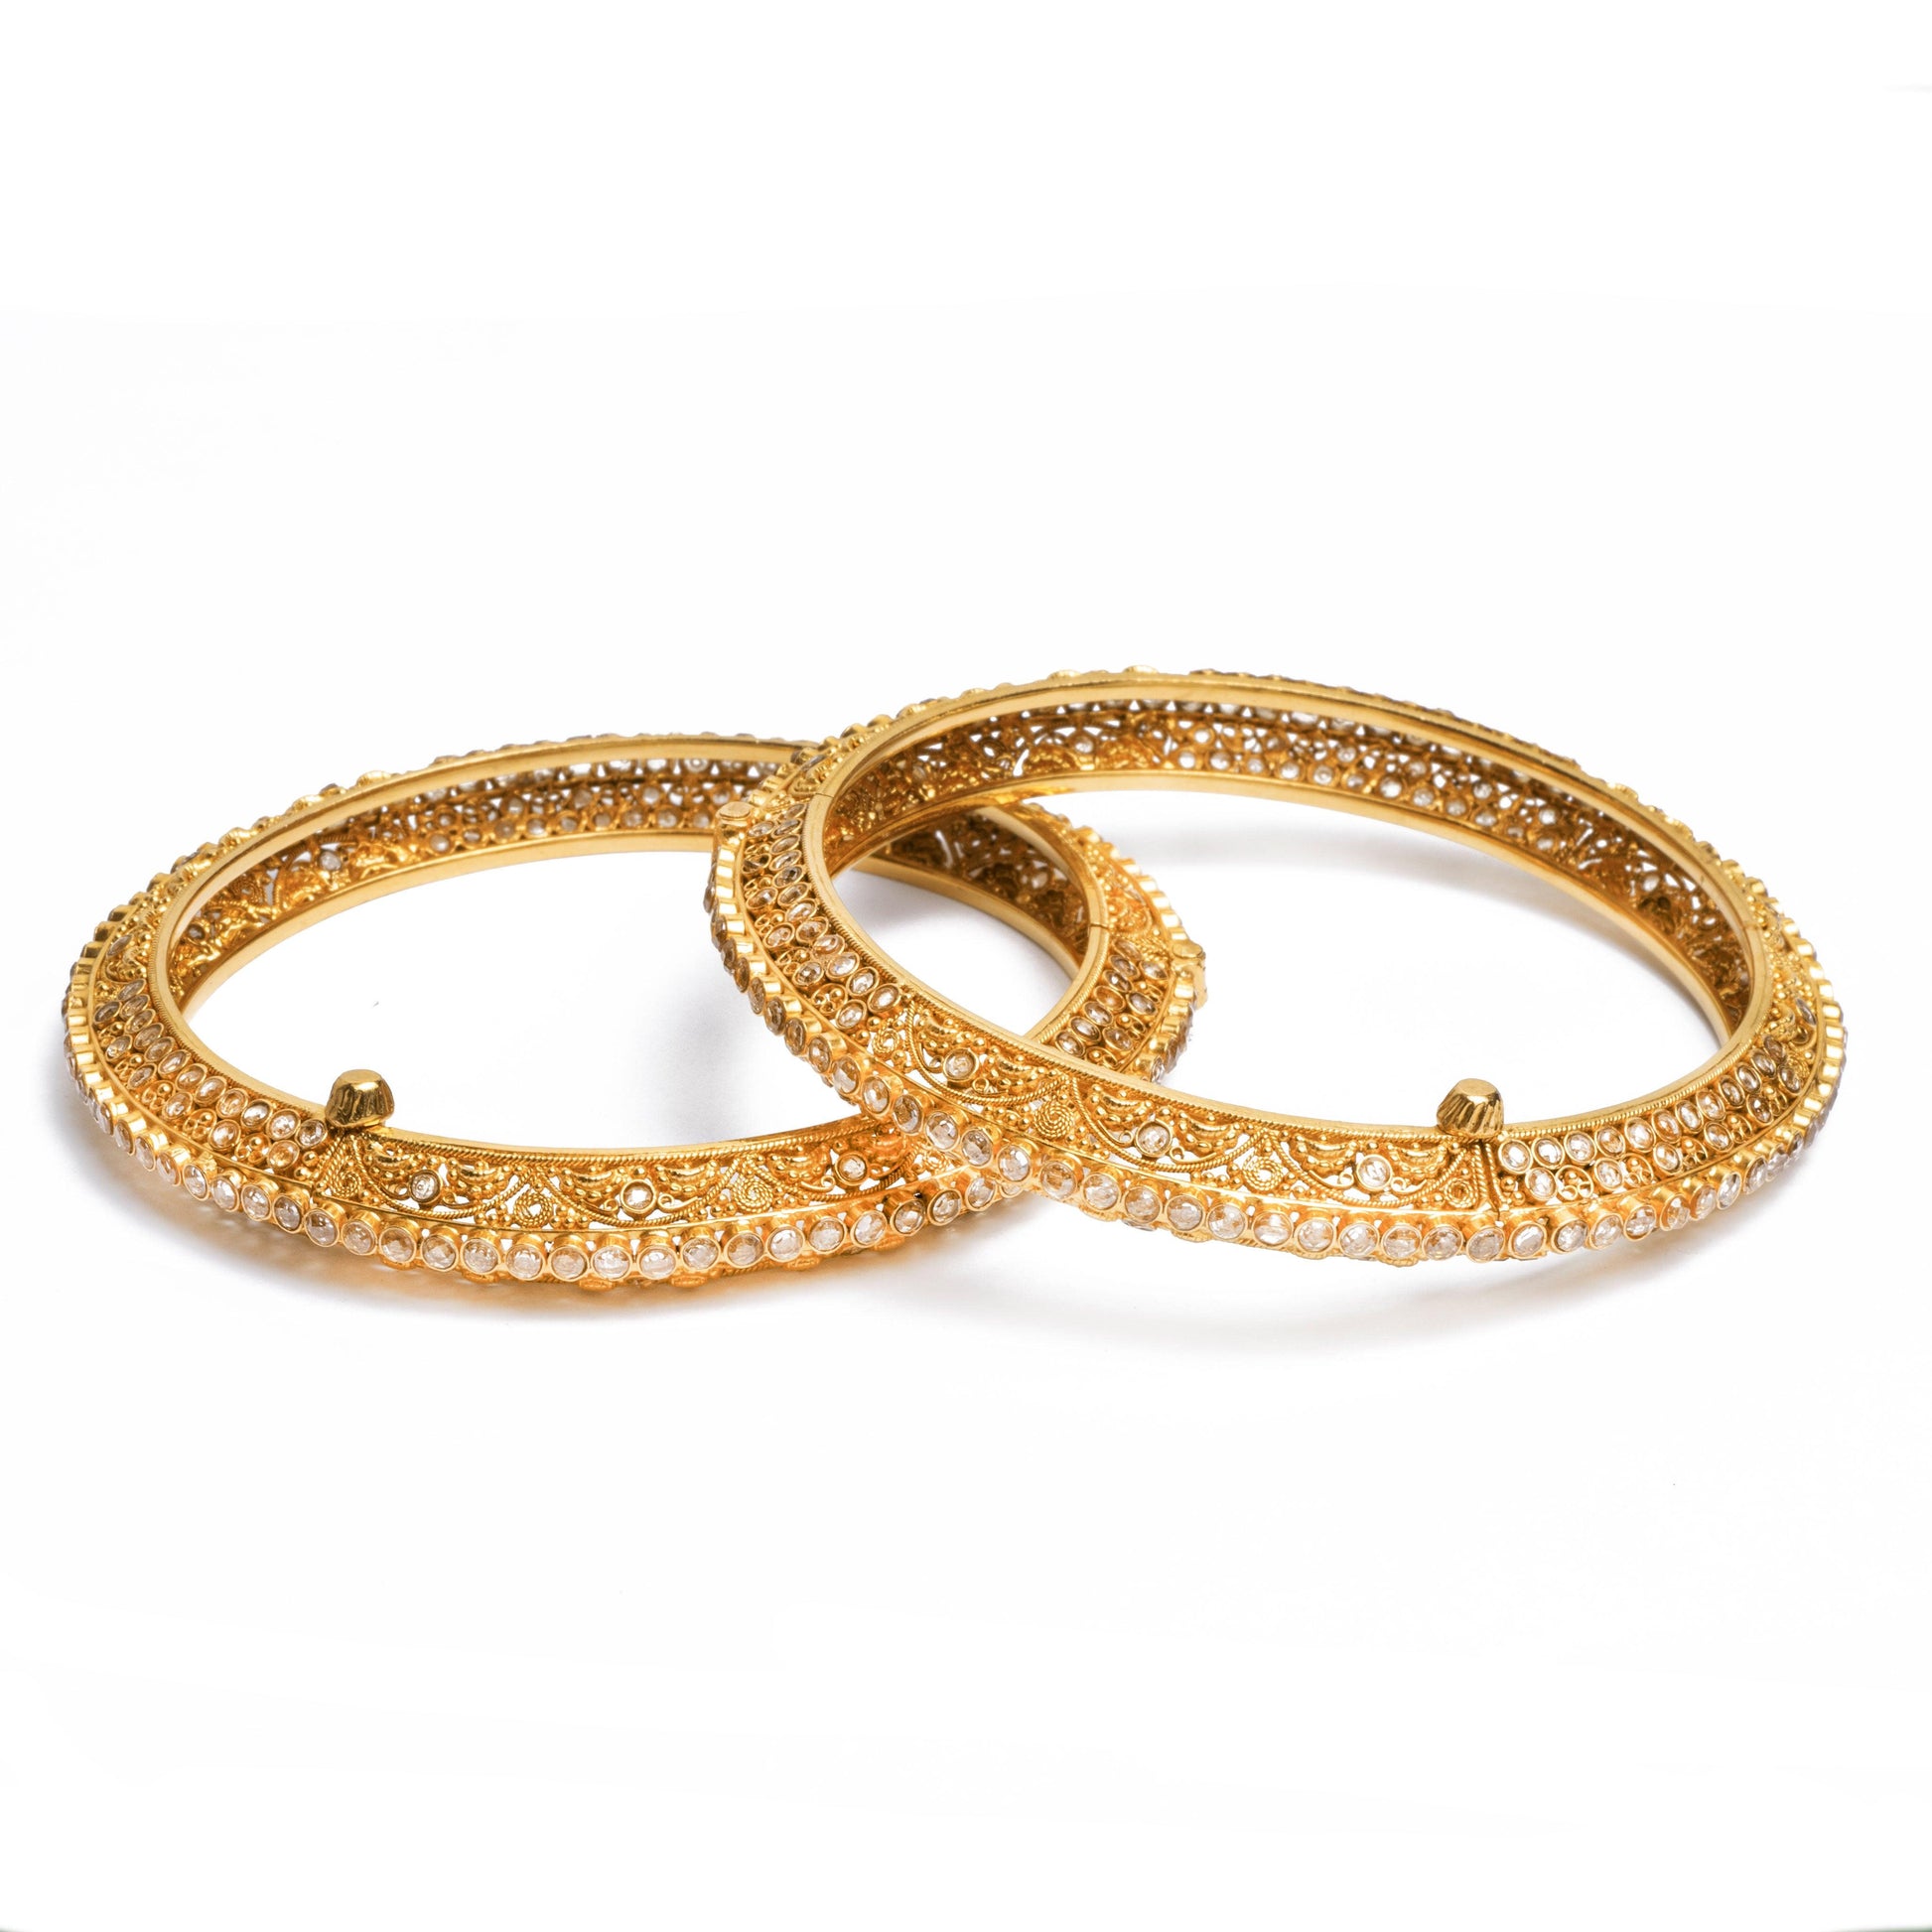 Pair of 22ct Gold Antiquated Look Openable Bangles with Polki Style Stones (71.3g) B-8276 - Minar Jewellers